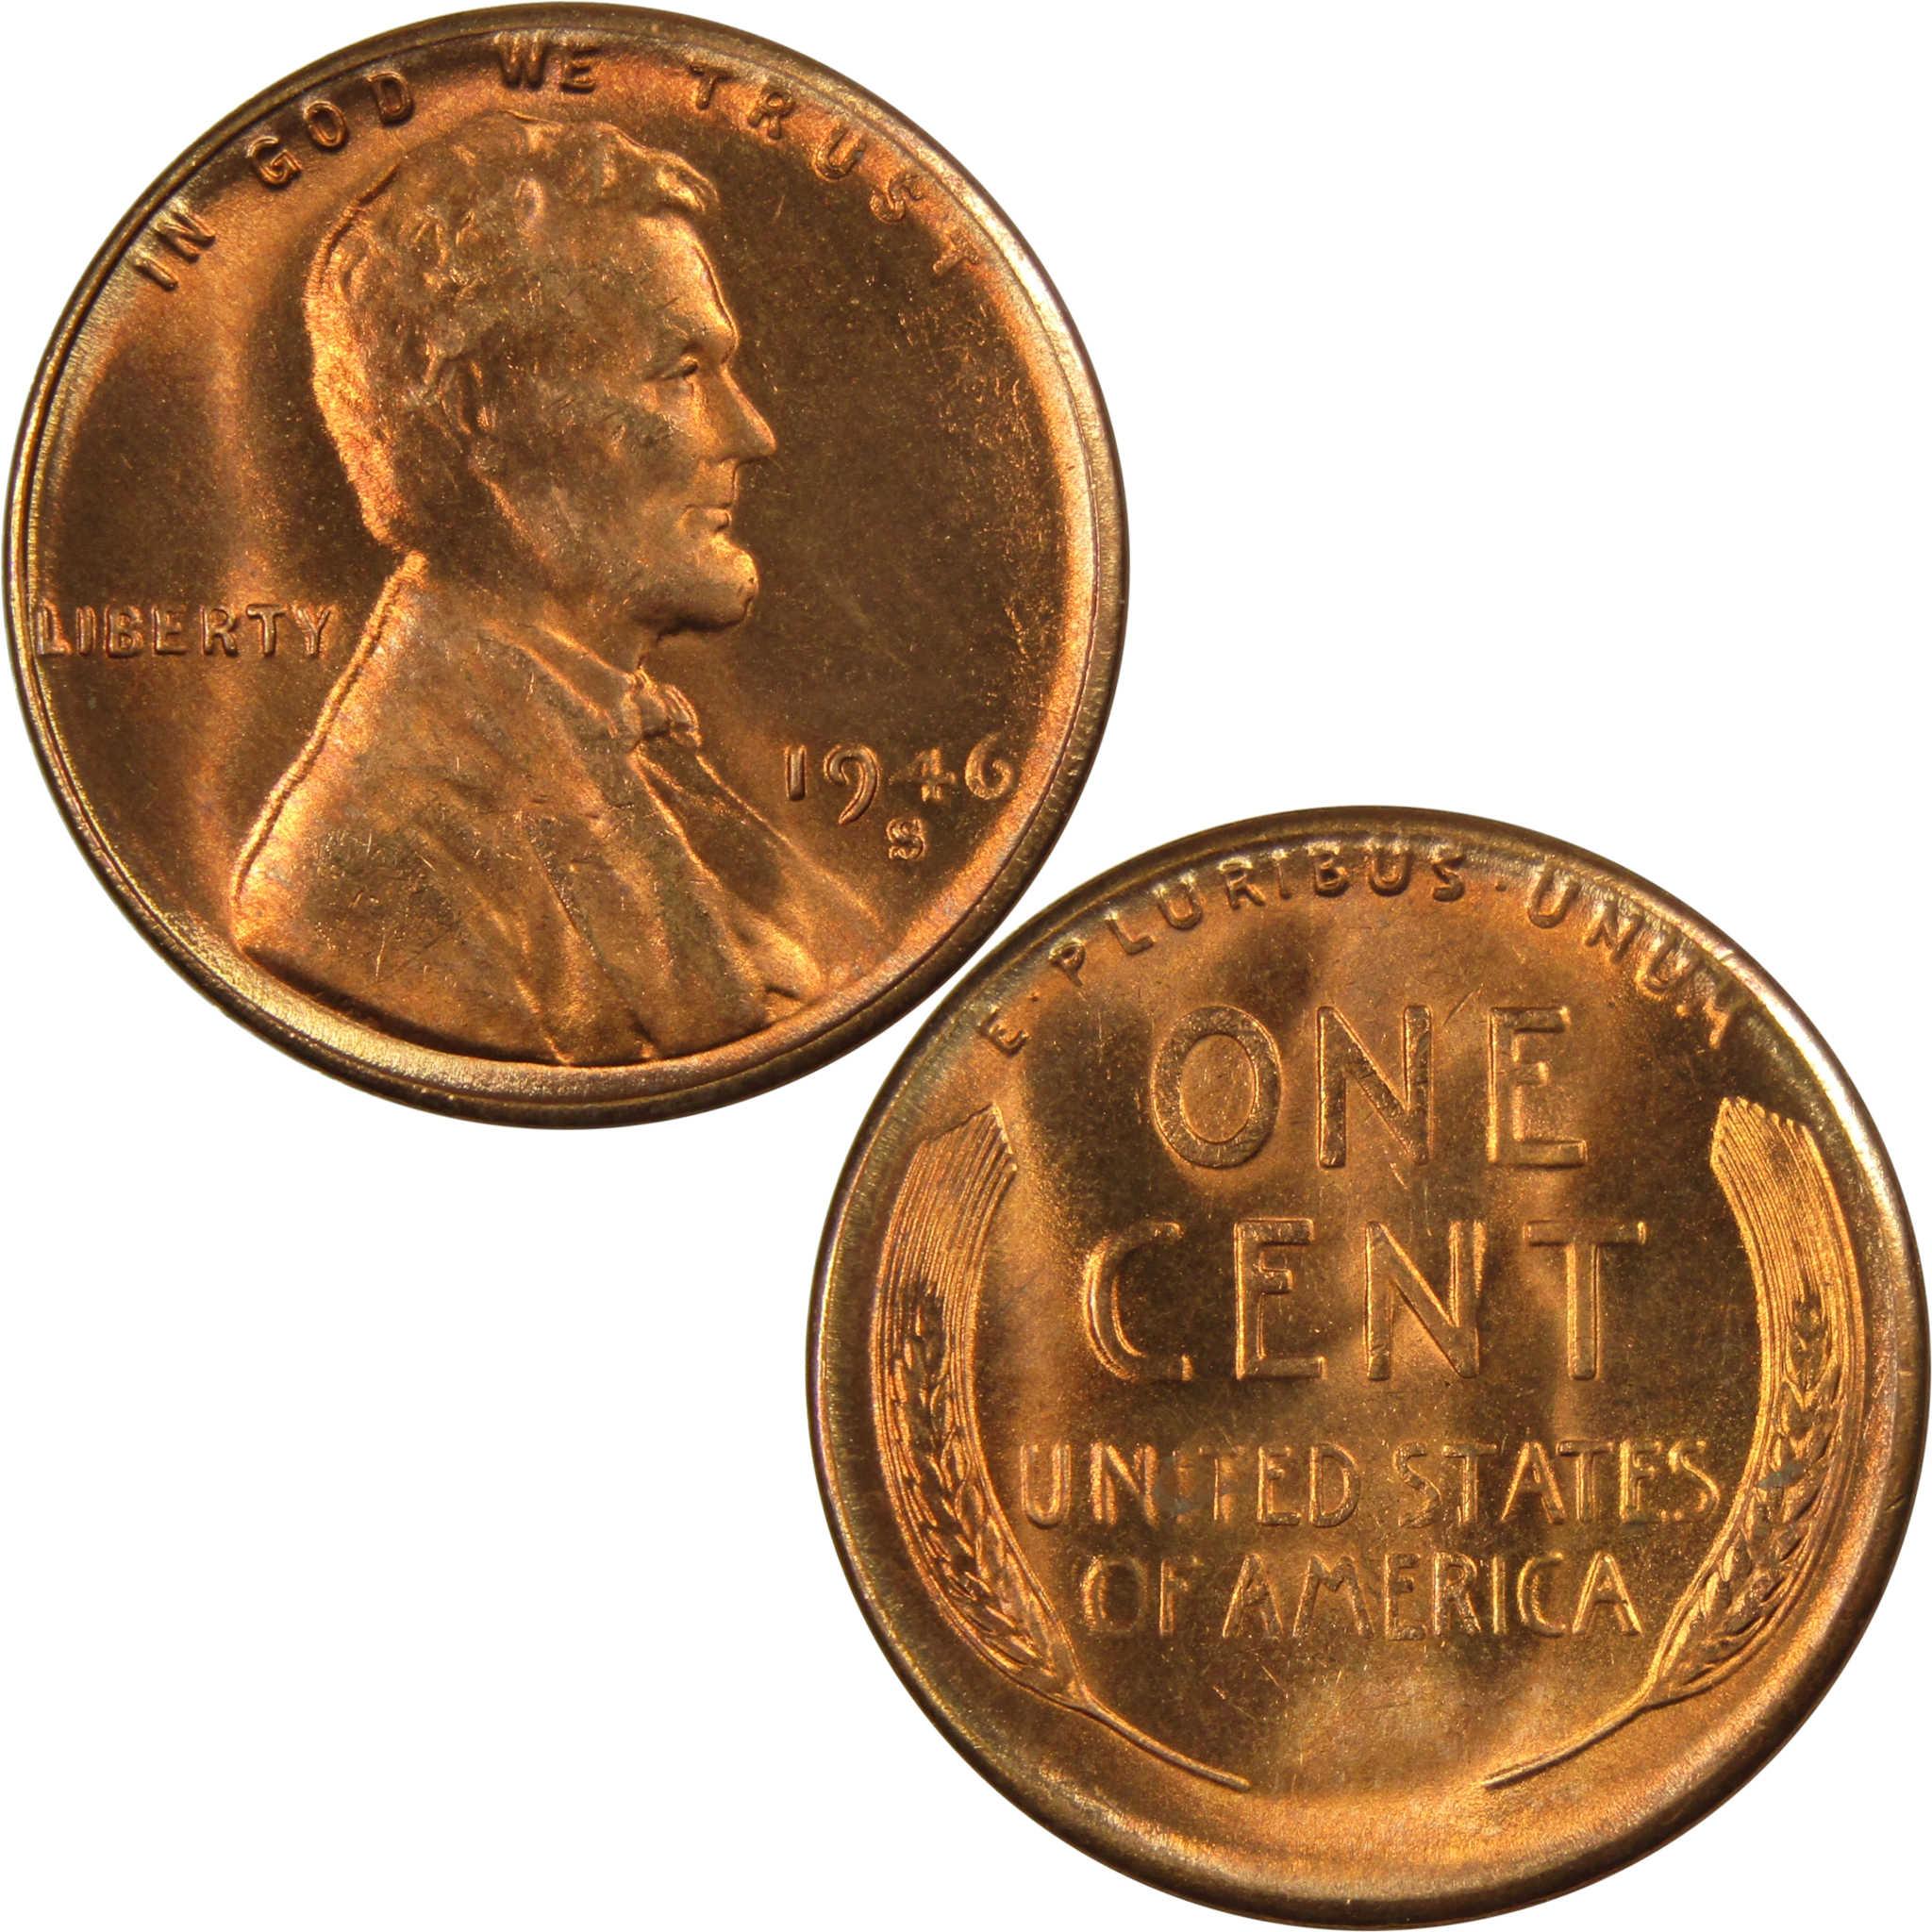 1946 S Lincoln Wheat Cent BU Uncirculated Mint State Bronze Penny 1c Coin